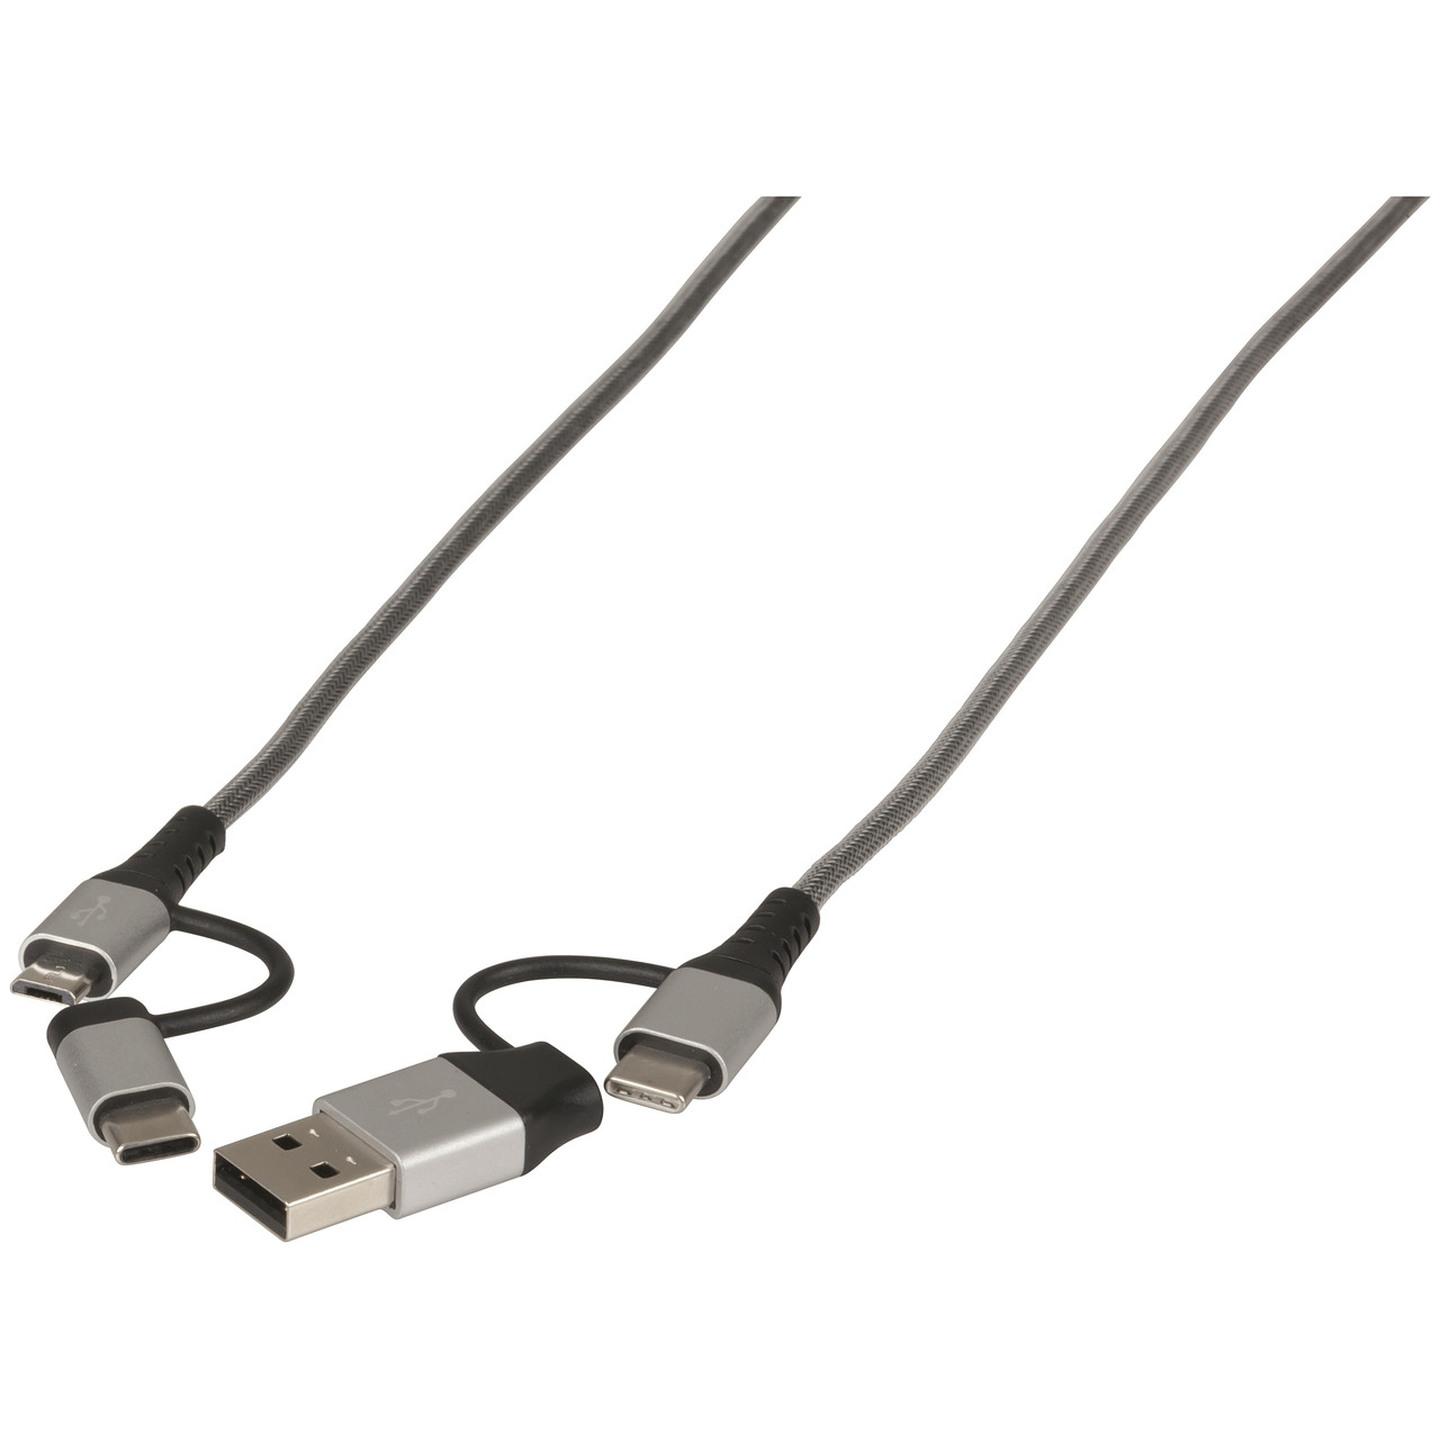 4-in-1 USB type C Connection Cable